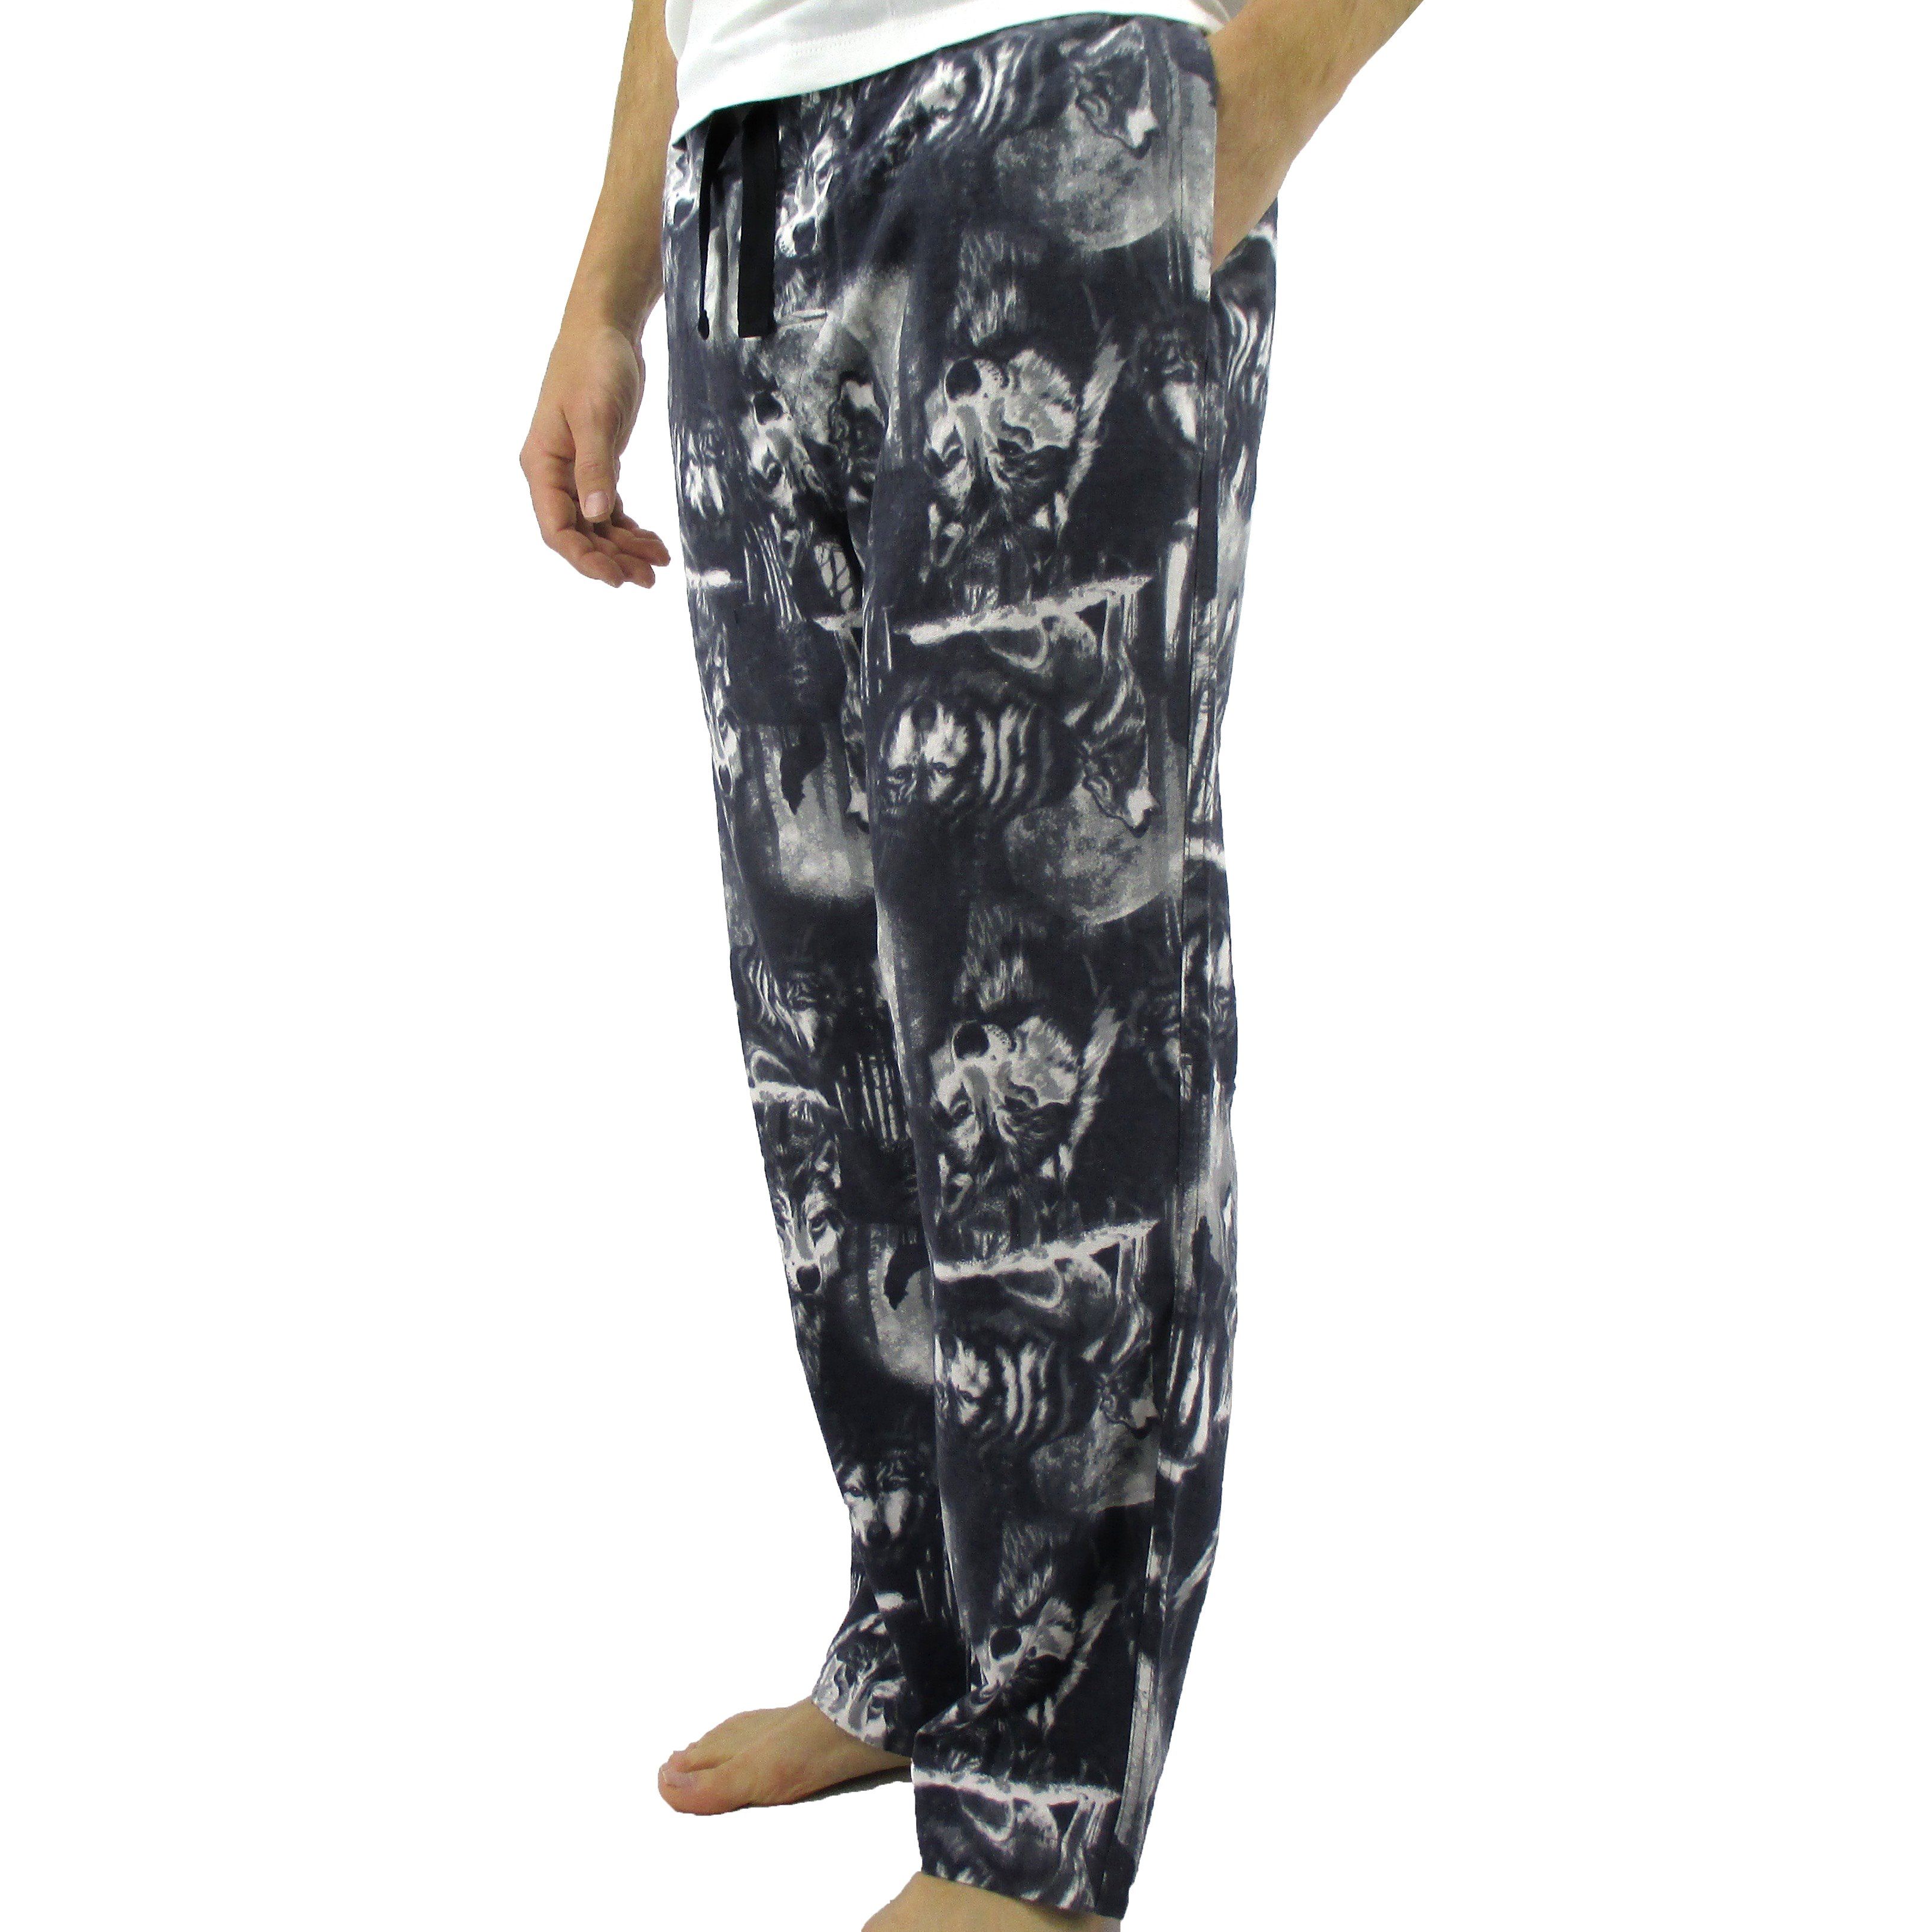 Soft Comfy Loungewear Sleep Pants for Men with Wolves All Over Print in Black